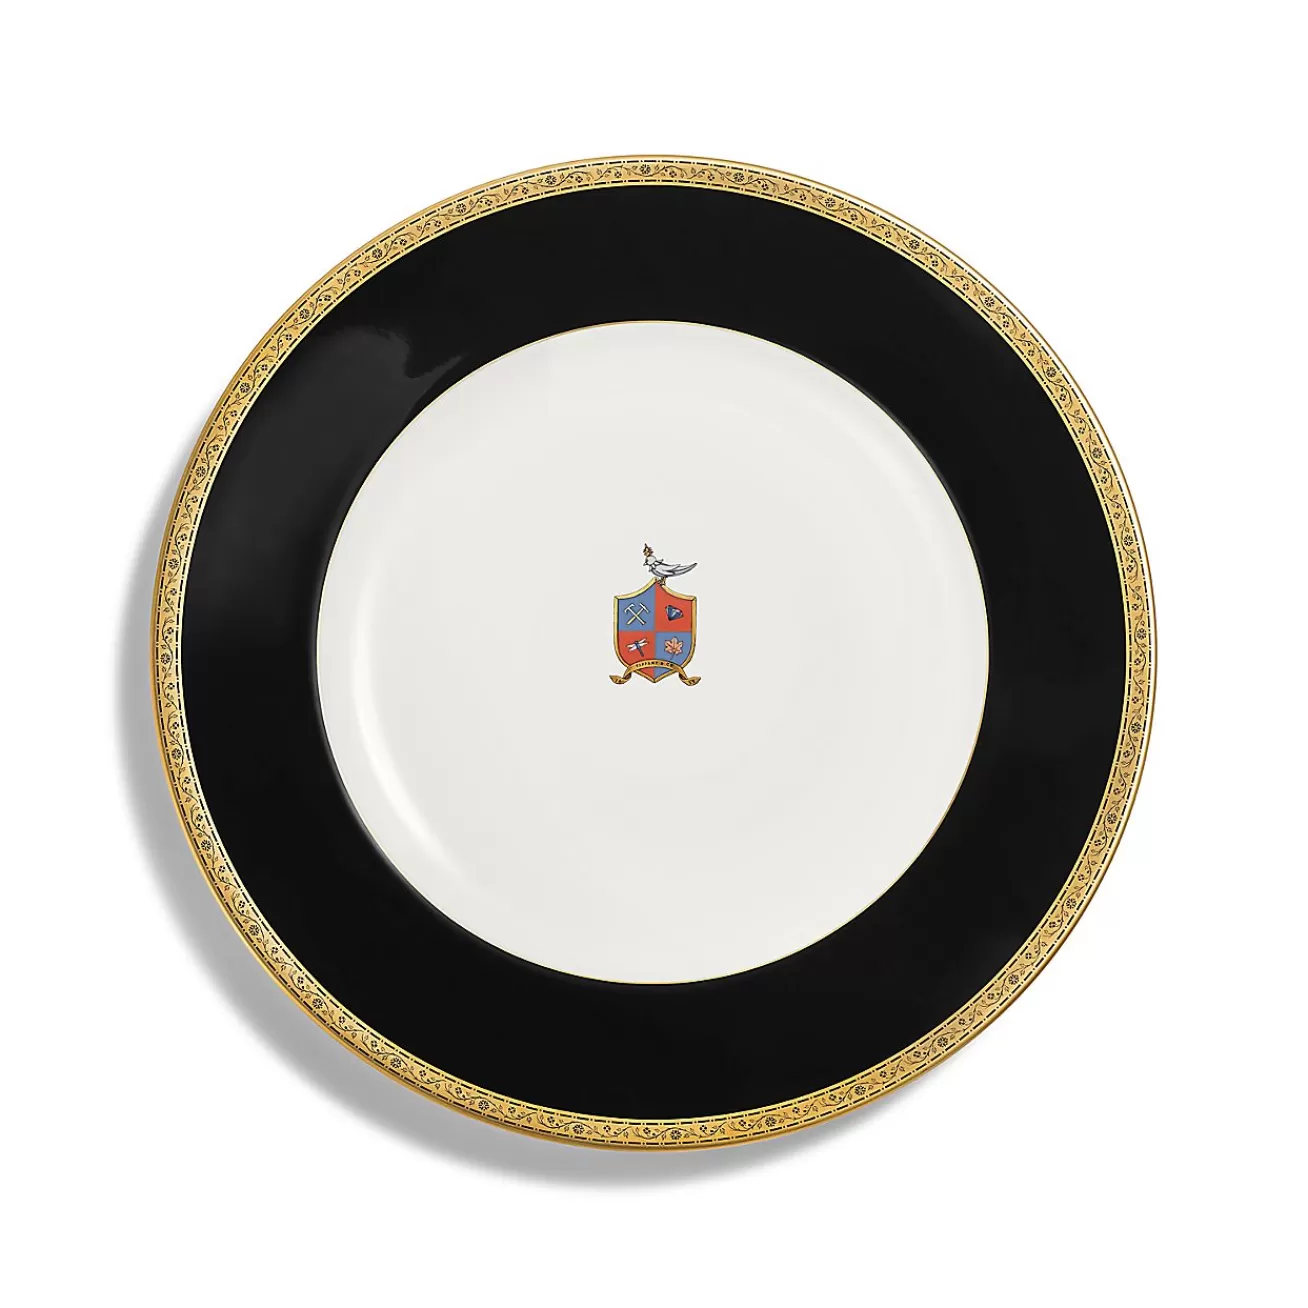 Tiffany & Co. Tiffany Crest Dinner Plate in Bone China | ^ The Home | Housewarming Gifts